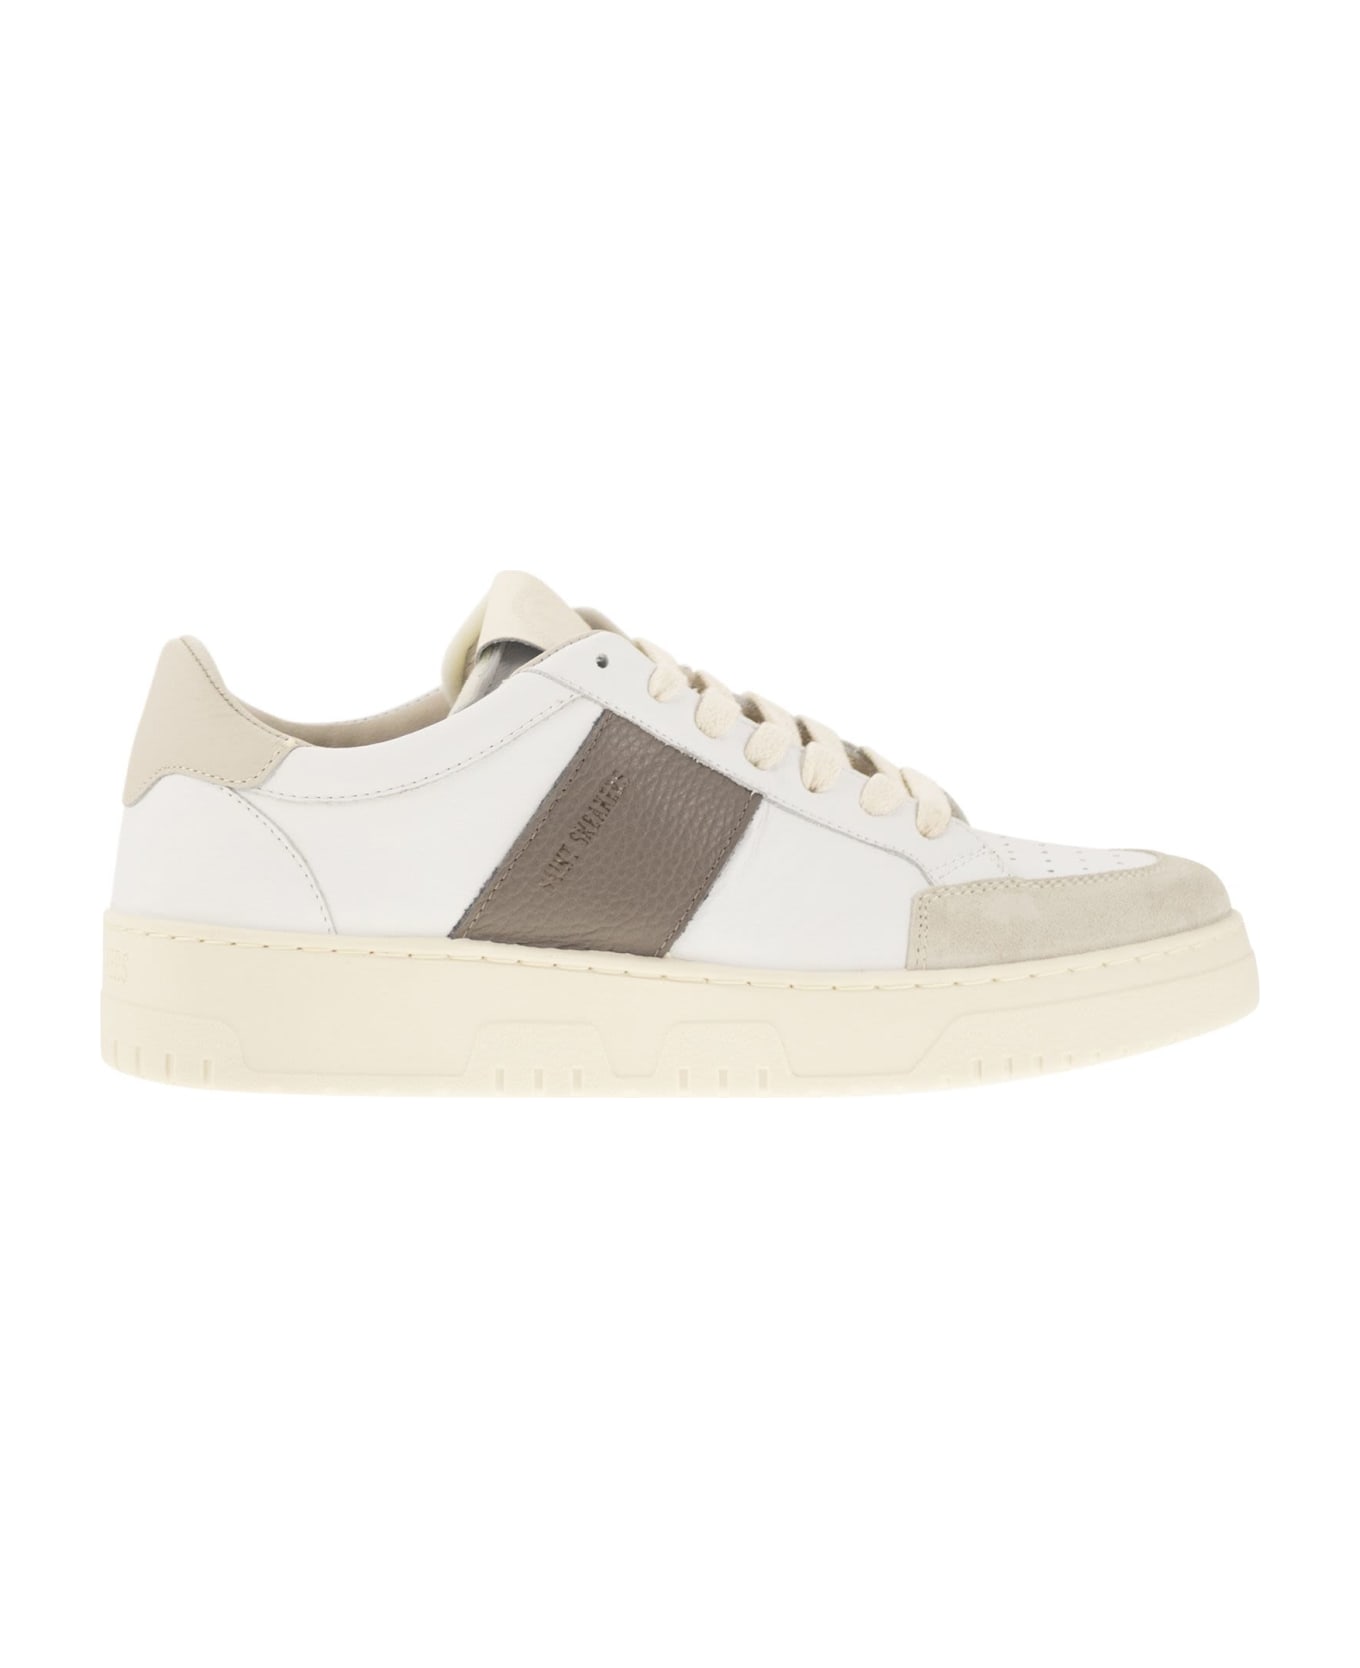 Saint Sneakers Sail - Leather And Suede Trainers - White/grey スニーカー